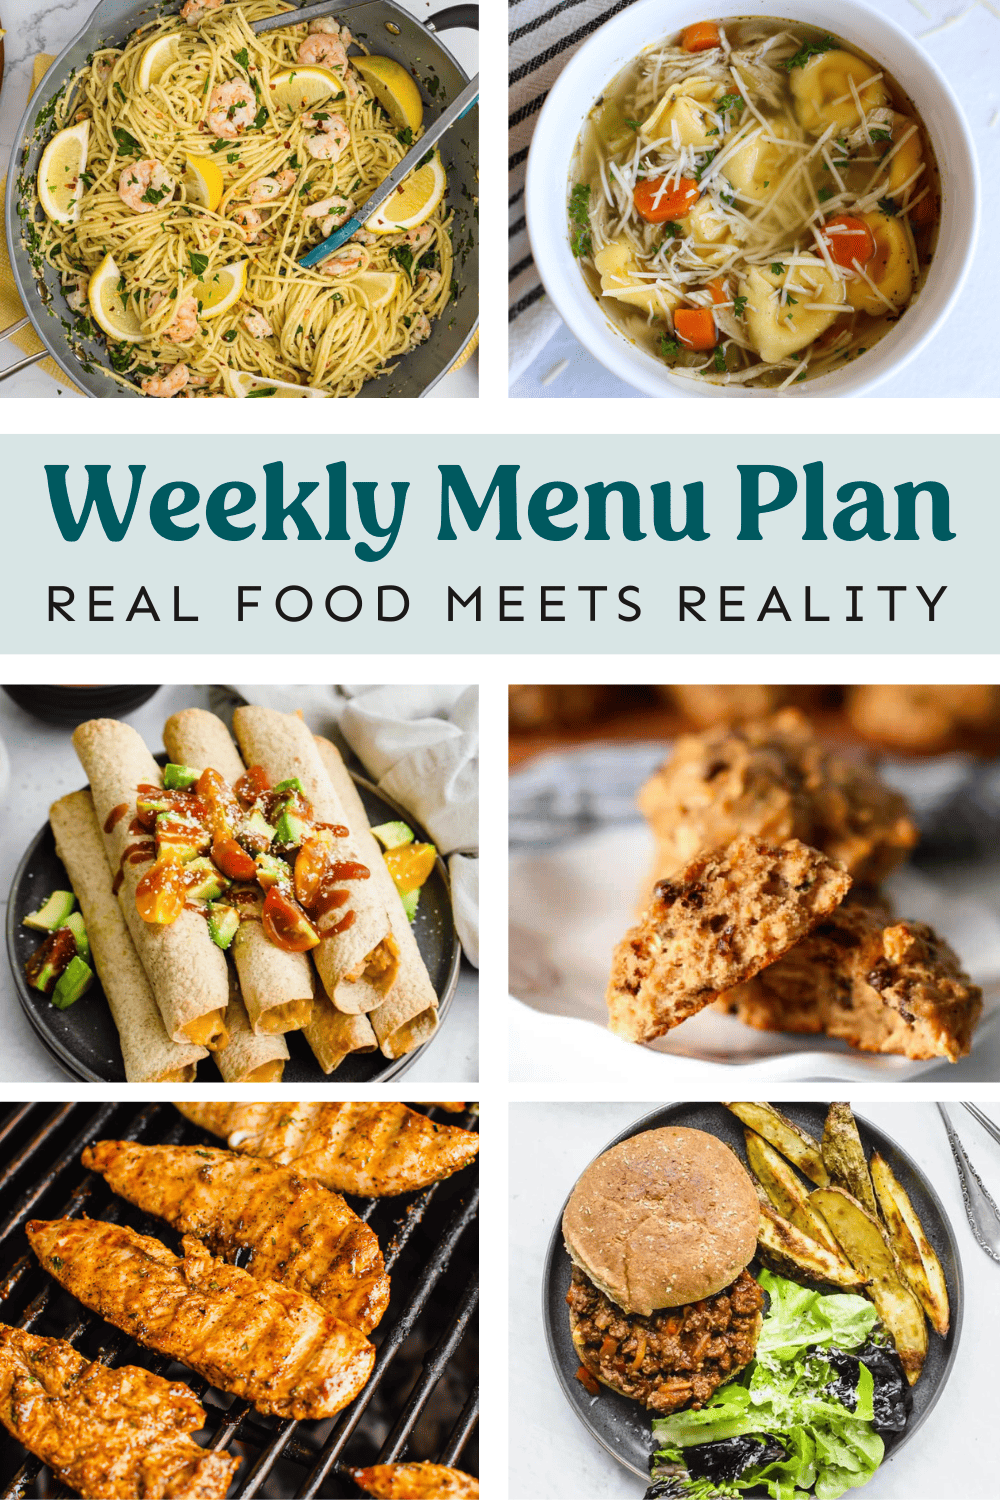 Collage of meal plan photos.